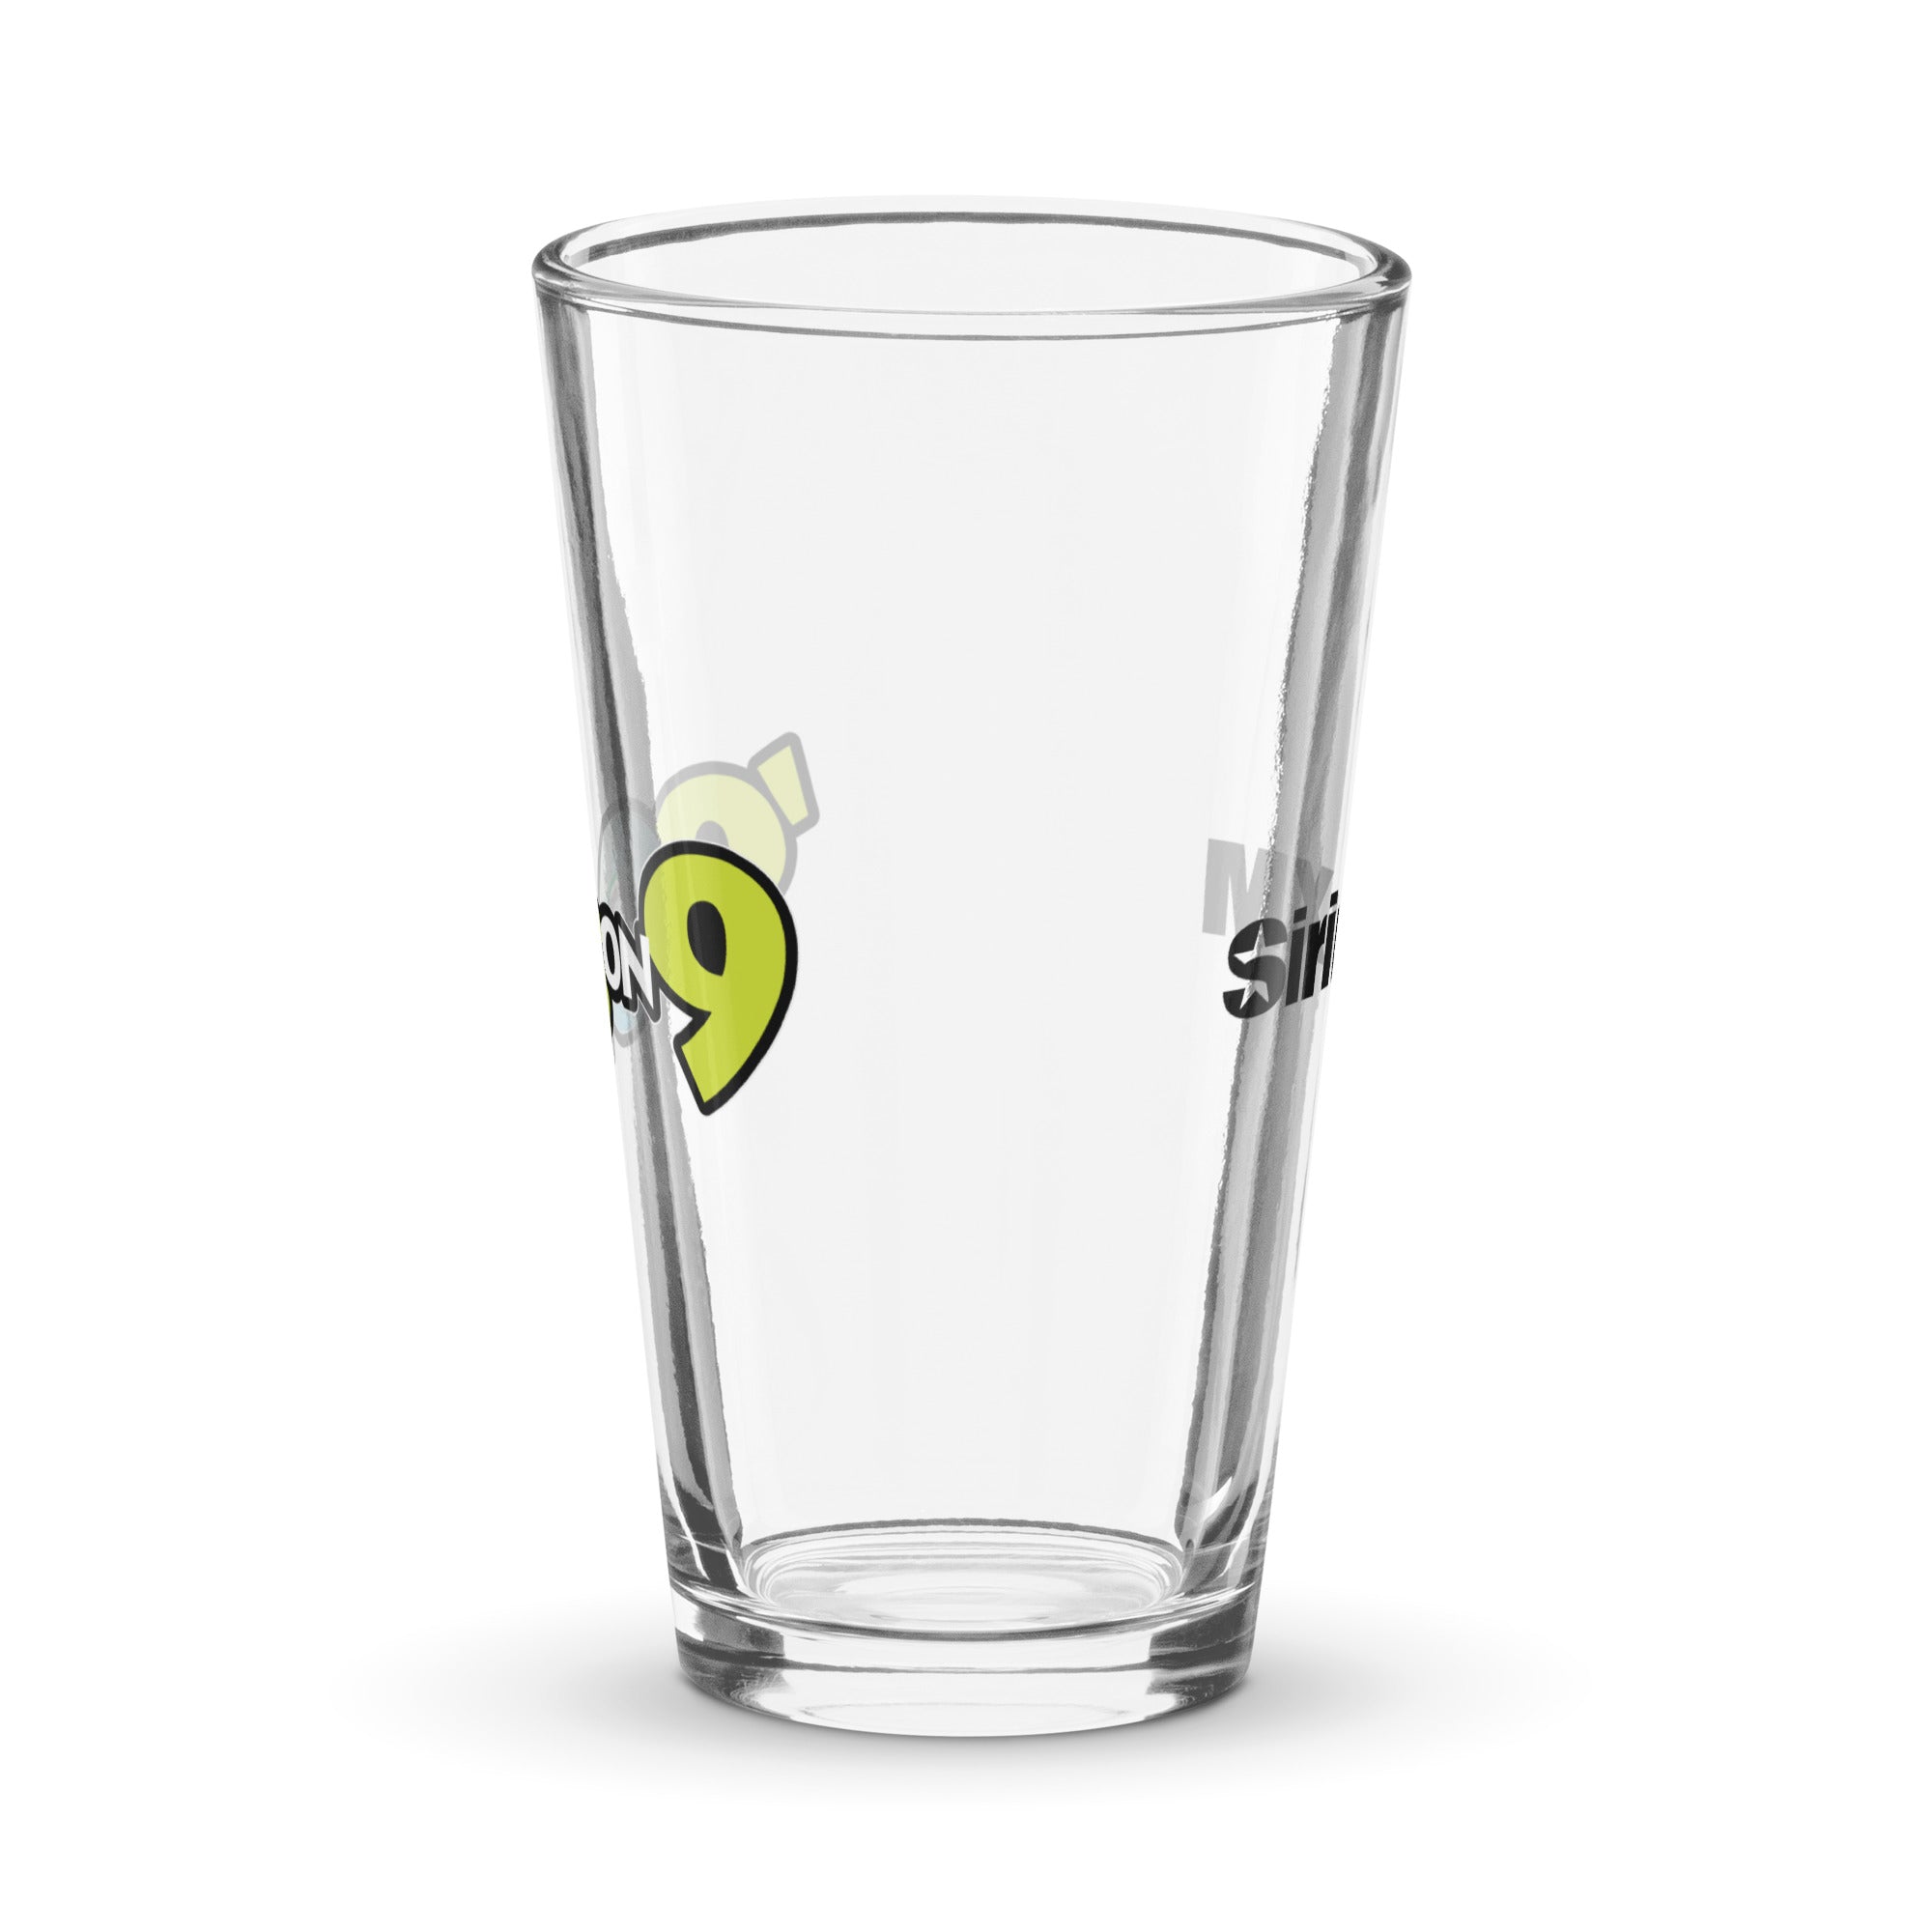 90s on 9: Pint Glass